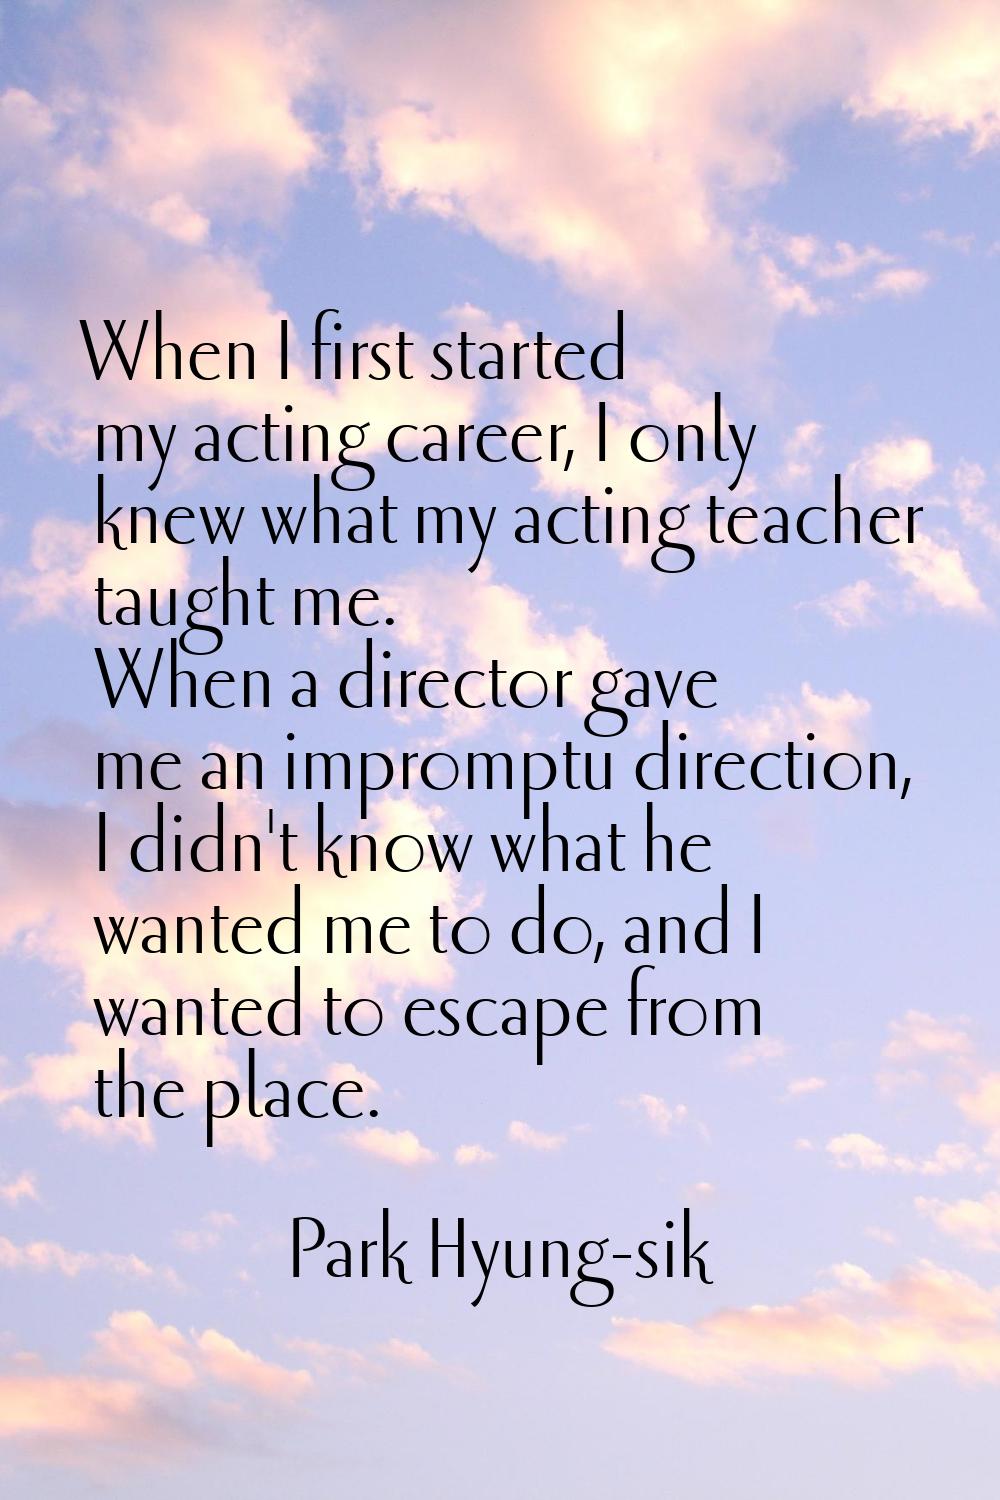 When I first started my acting career, I only knew what my acting teacher taught me. When a directo